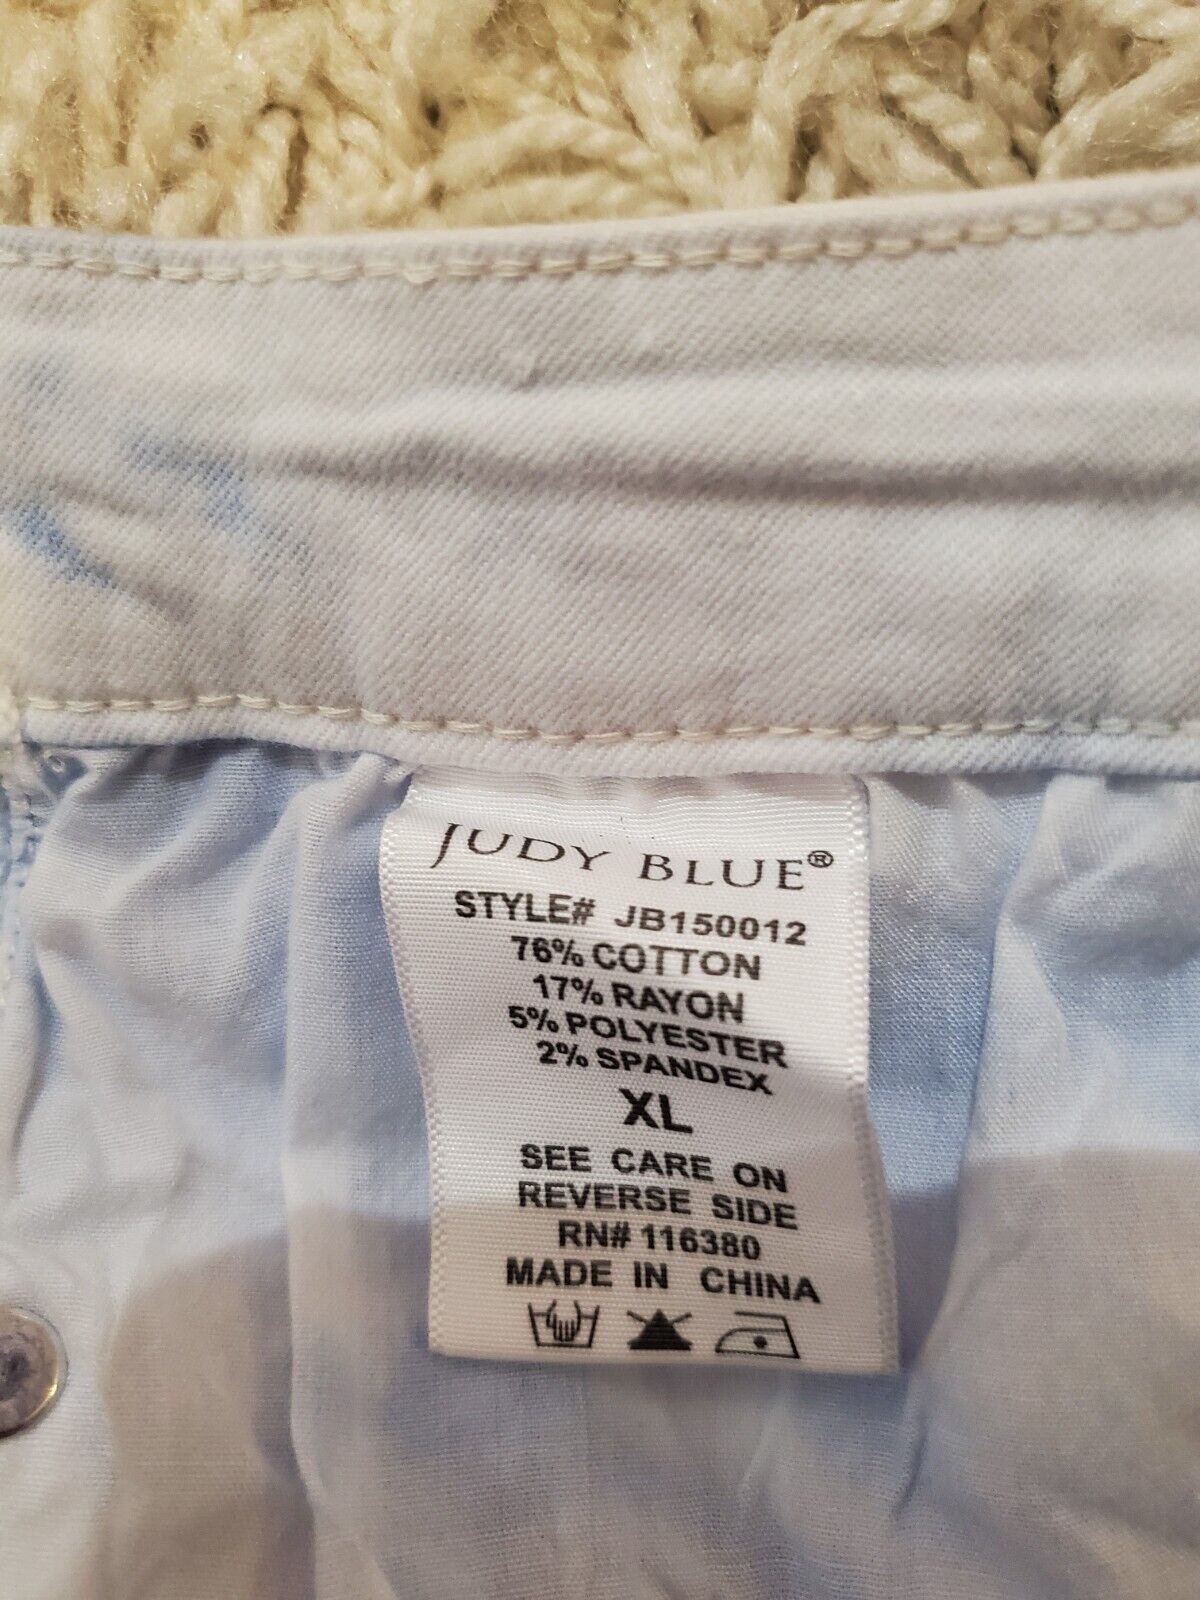 Judy Blue Women's Blue And White Tie Dye Shorts M… - image 6